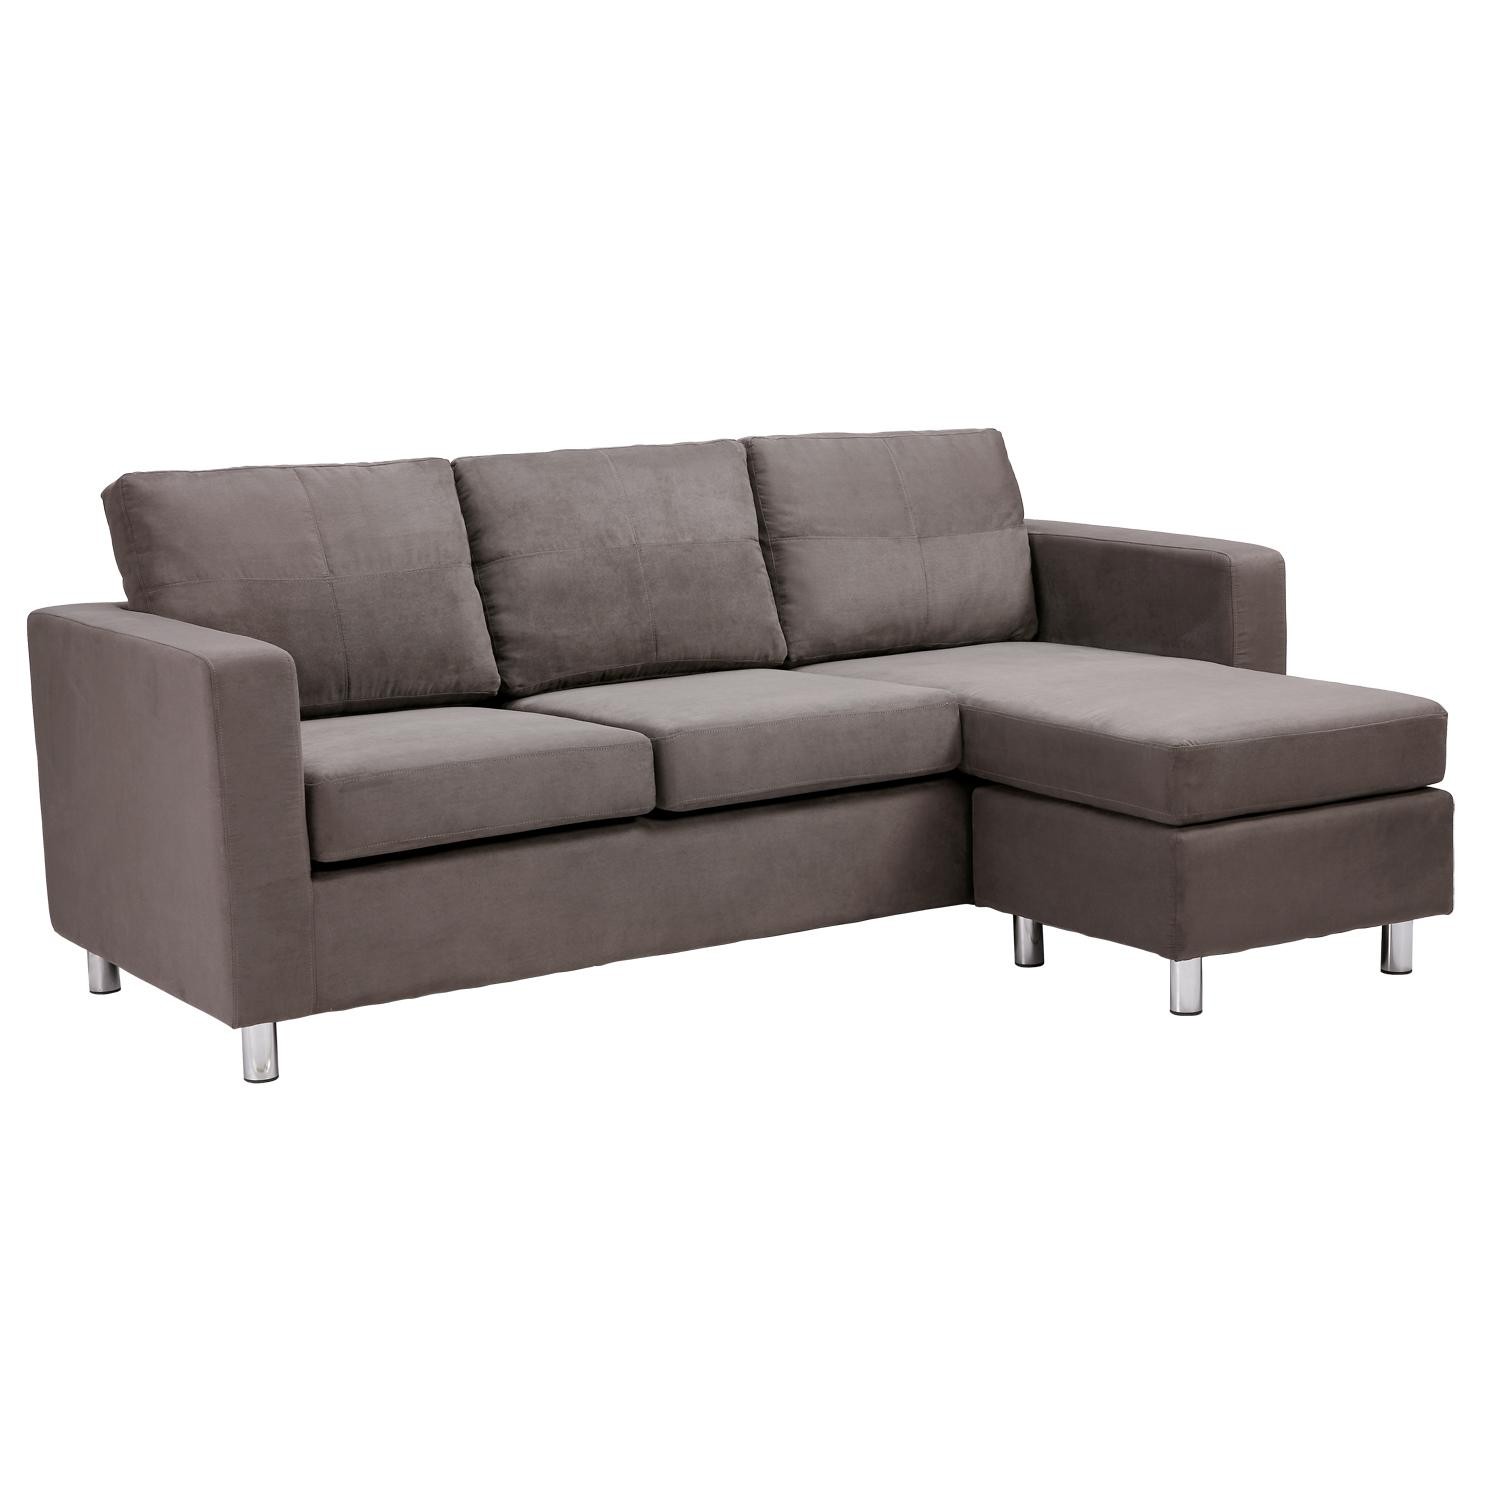 small sectional sofa bed photo - 5